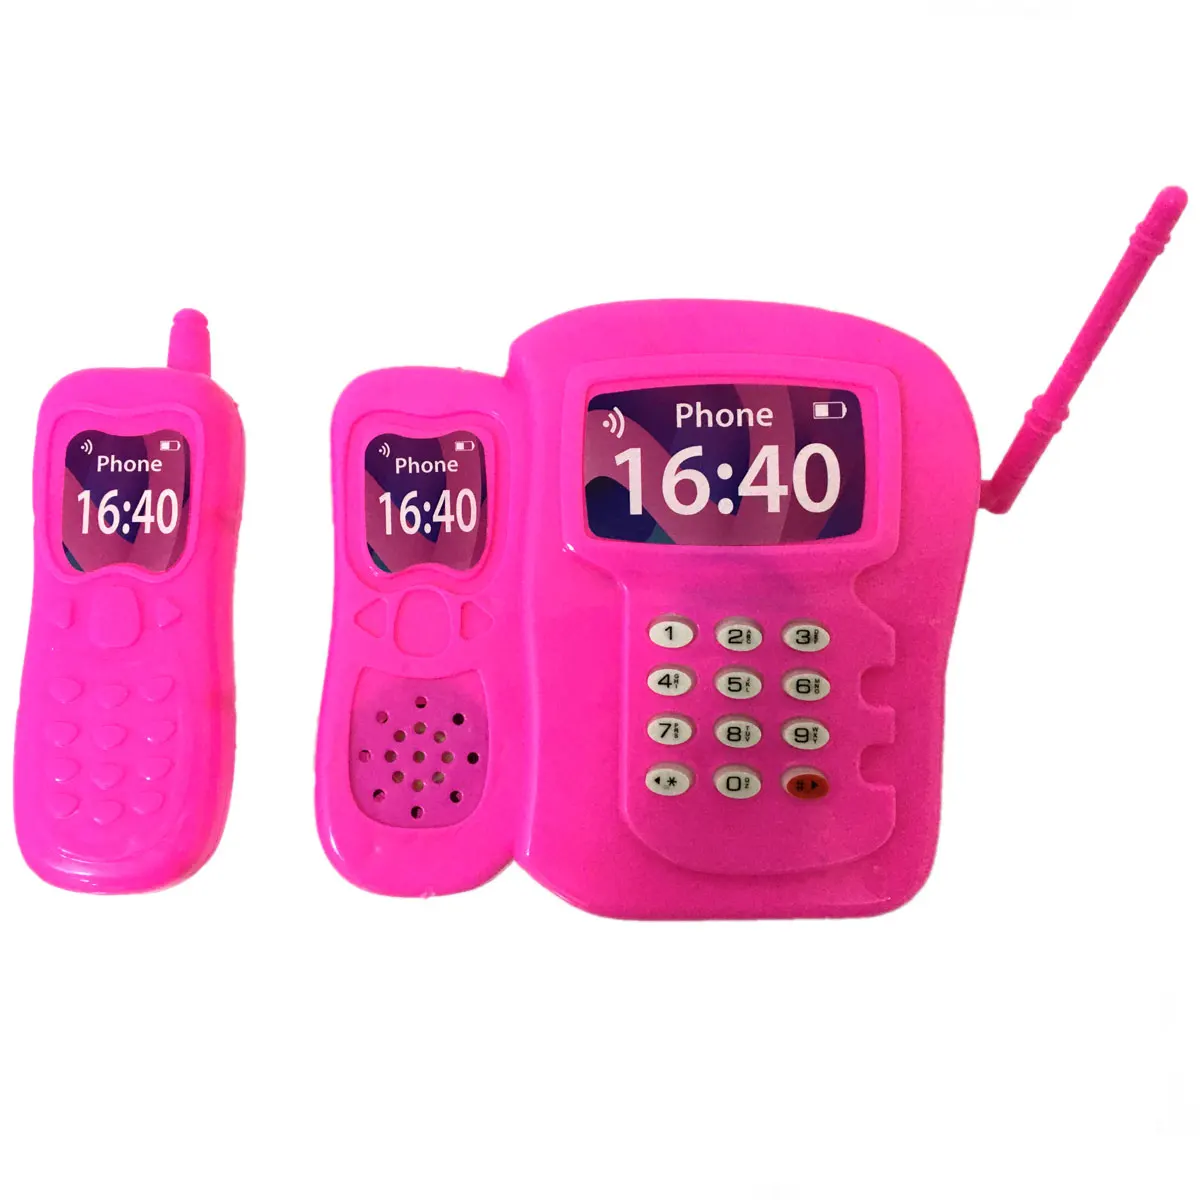 Lighted voice toy phone with bag